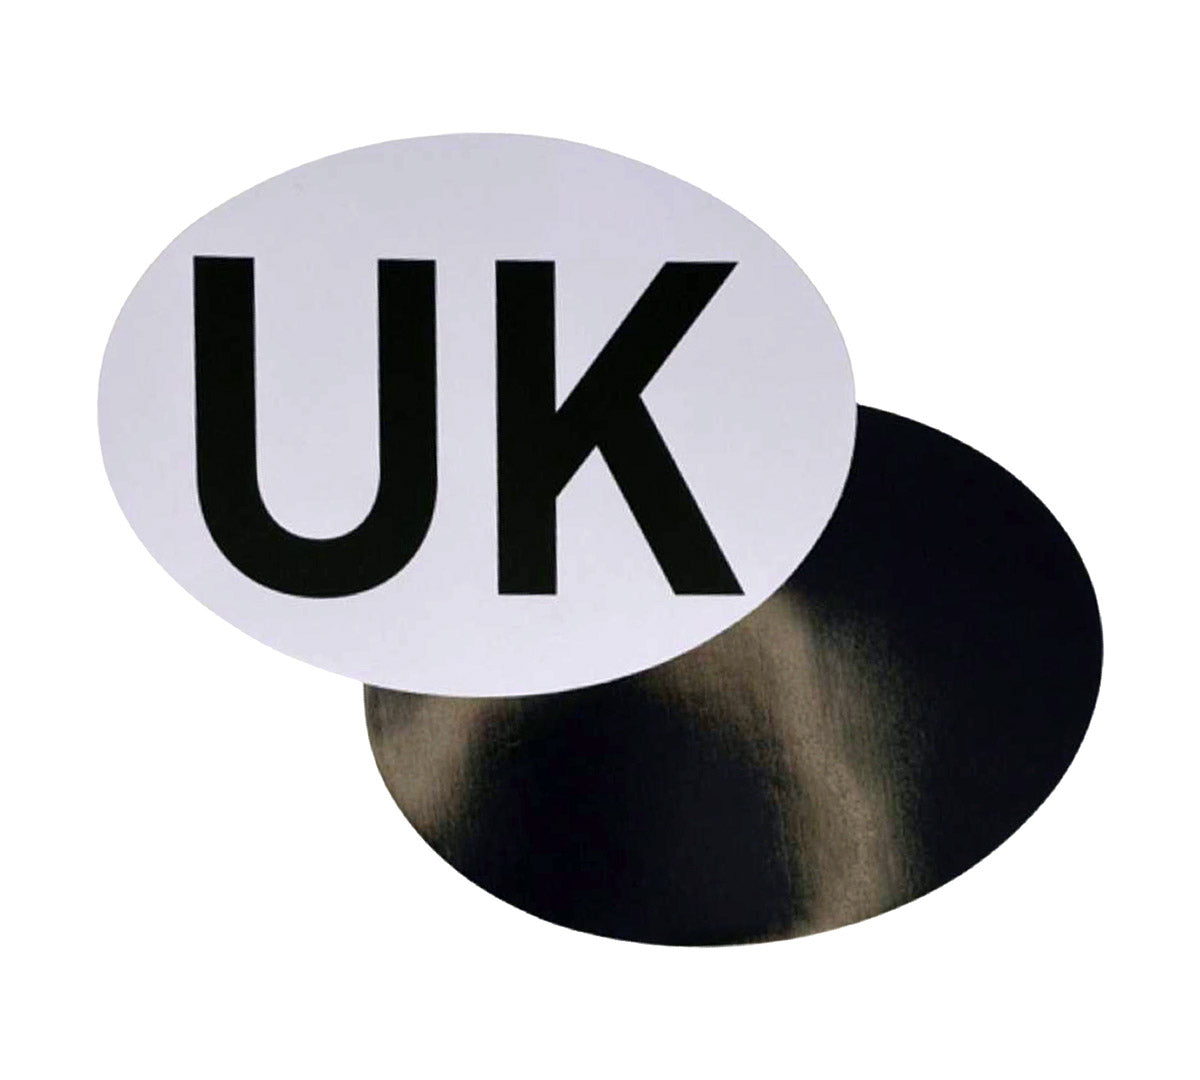 UK Country Sticker Sign Magnetic Reusable AA-Approved EU Legal Badge